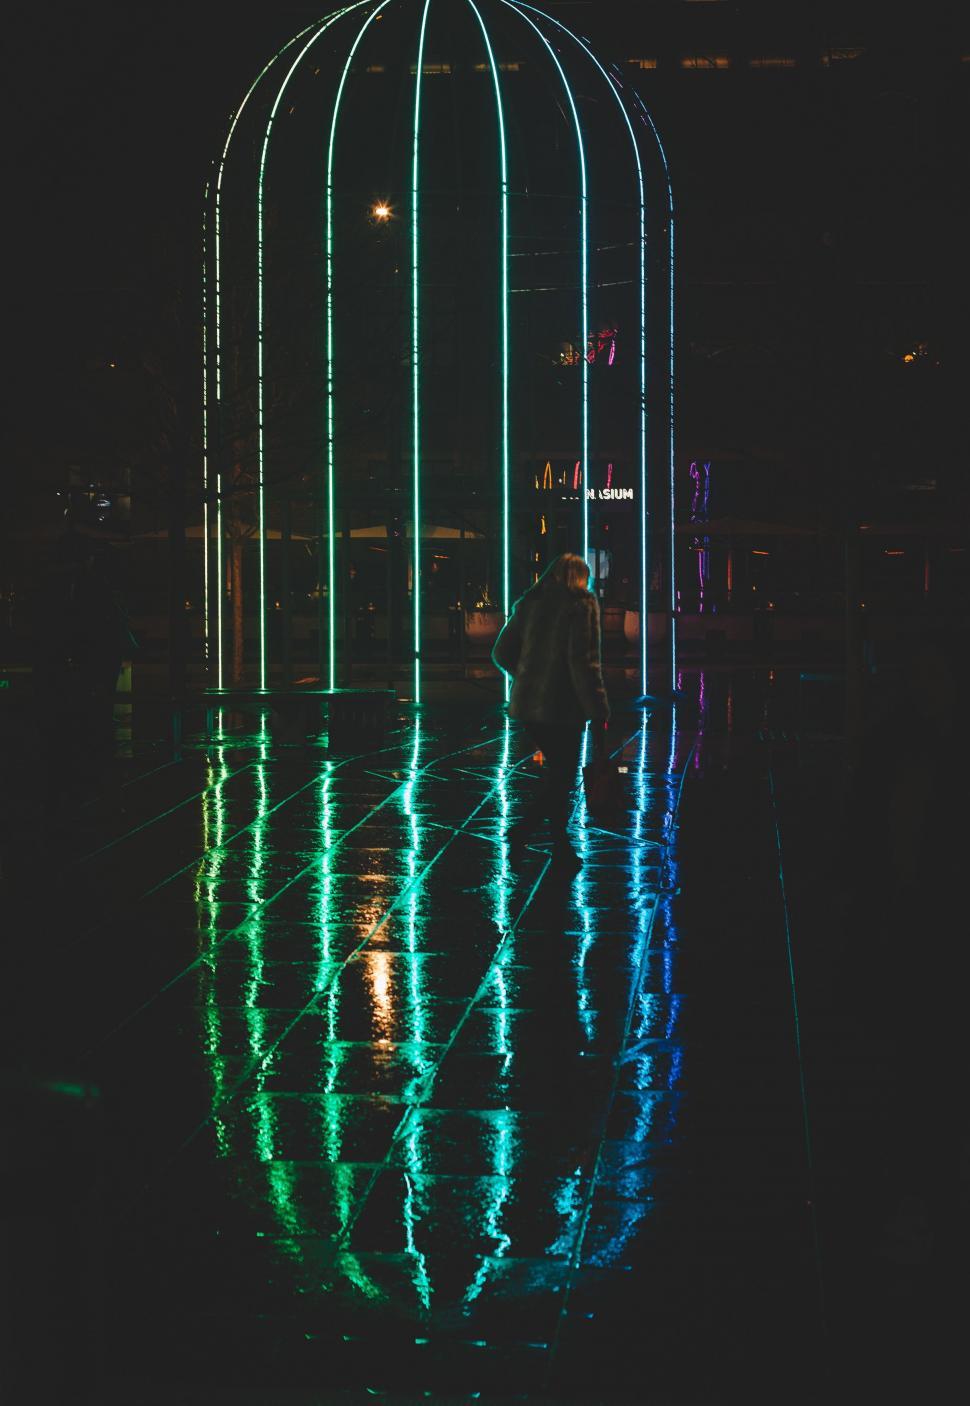 Free Image of Person Standing in Front of Lit Up Birdcage 